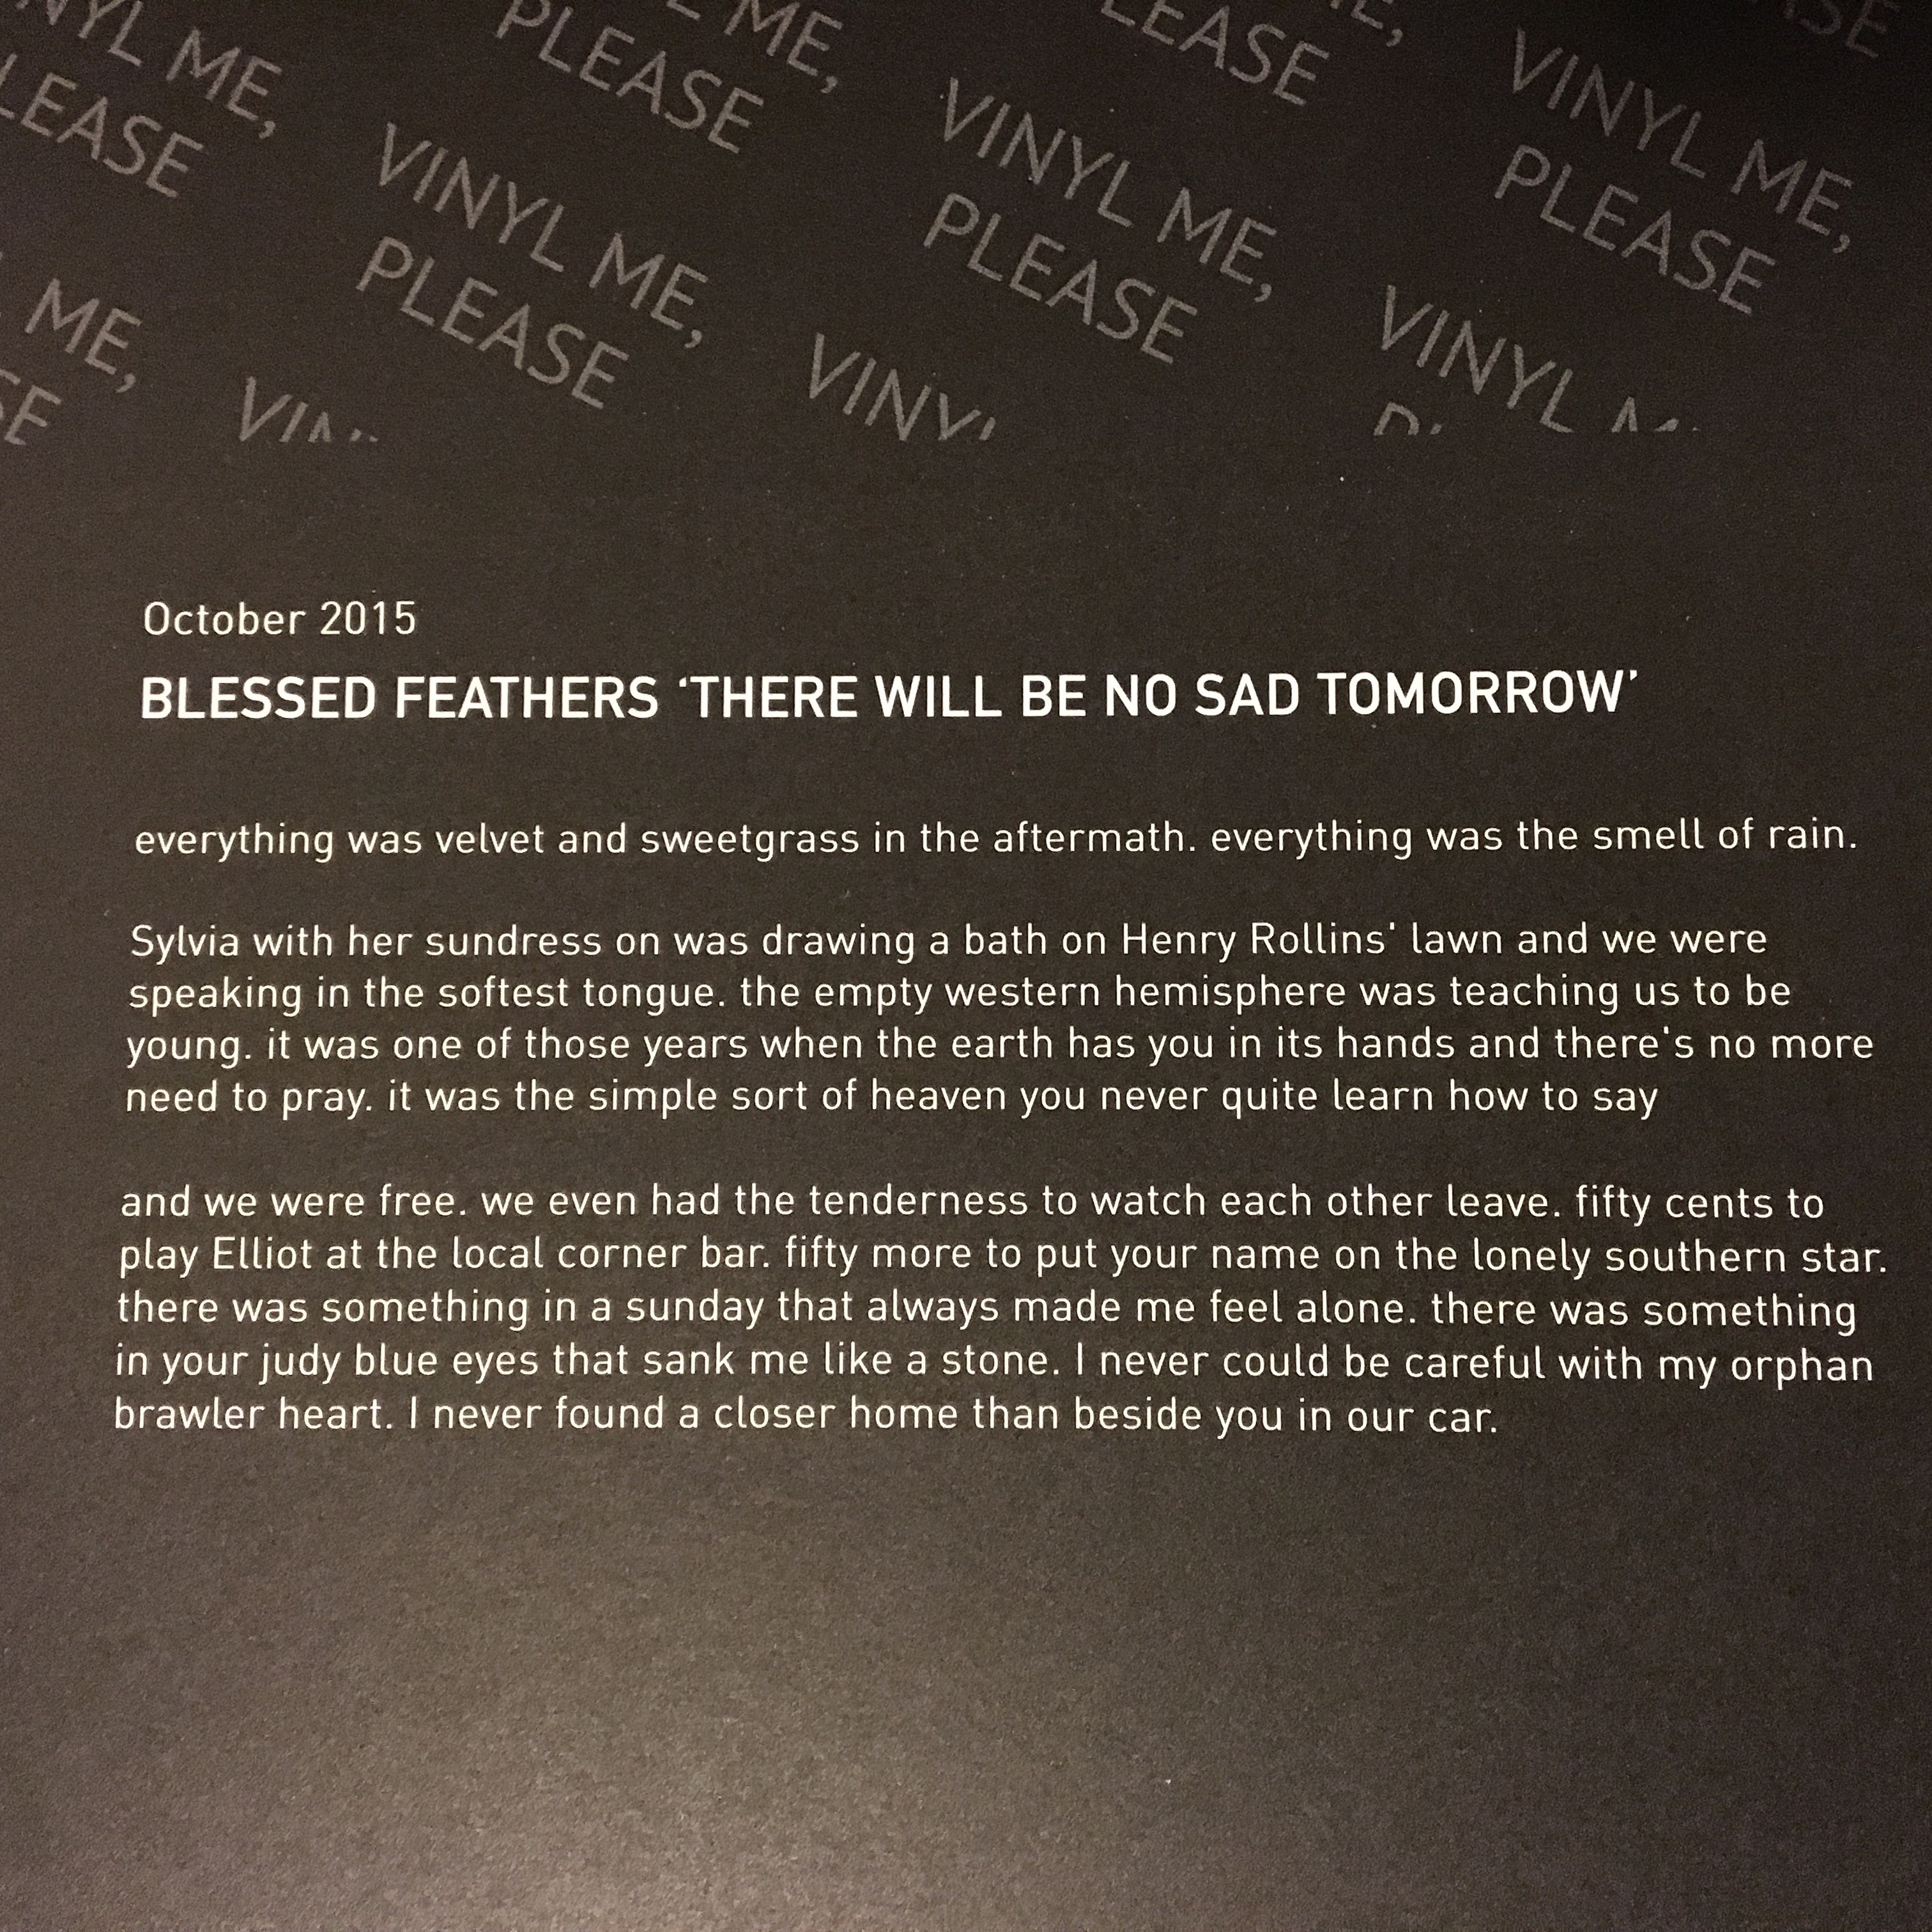 Blessed feathers, there will be no sad tomorrow, vinyl me, please